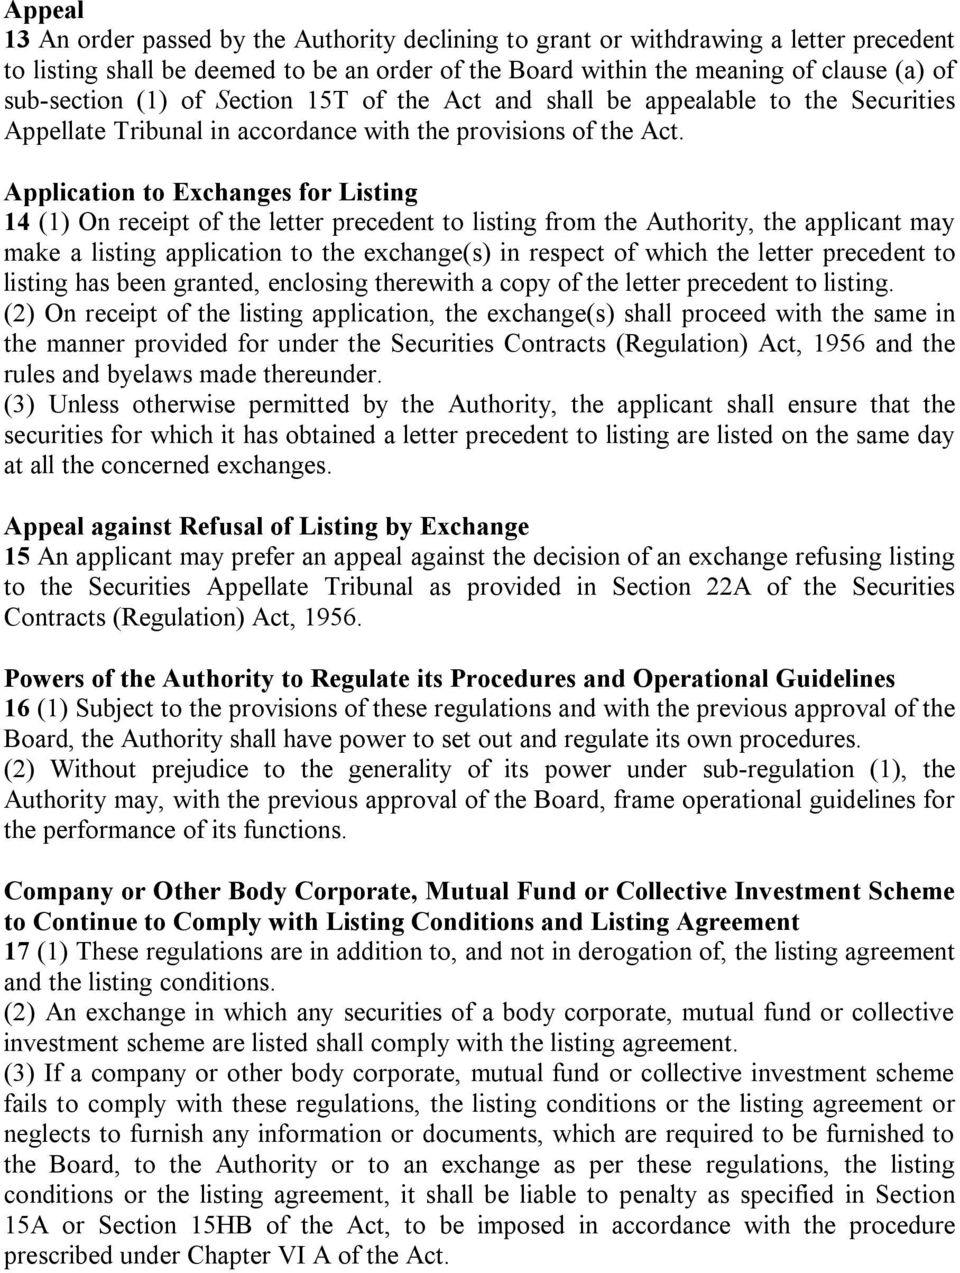 Application to Exchanges for Listing 14 (1) On receipt of the letter precedent to listing from the Authority, the applicant may make a listing application to the exchange(s) in respect of which the